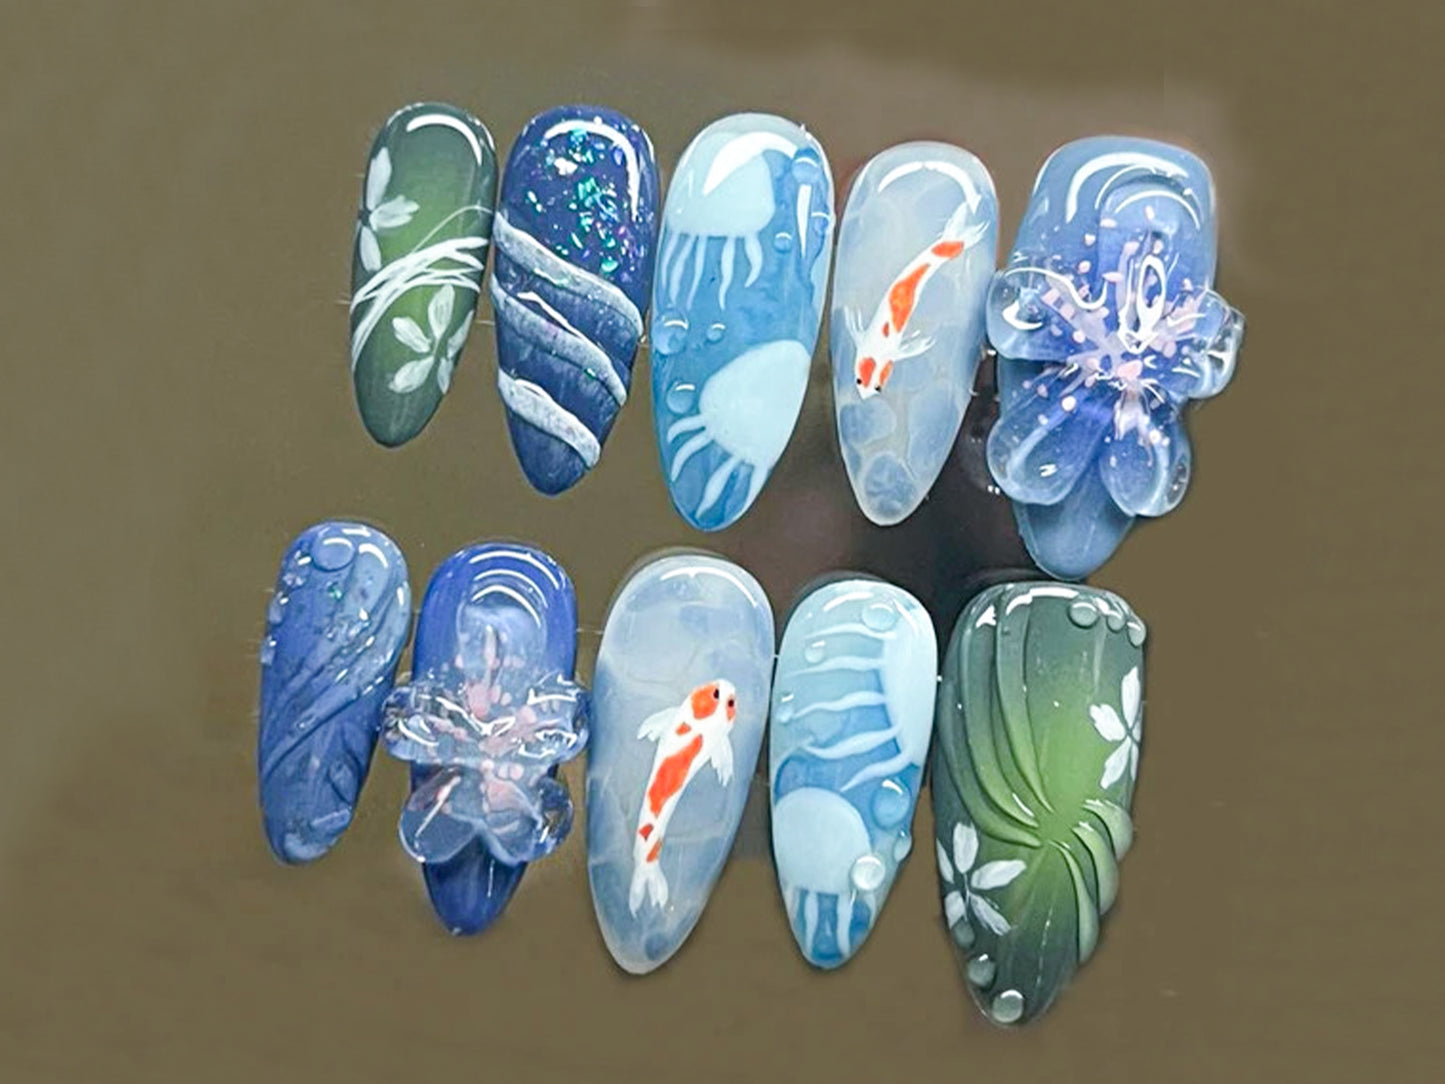 Ocean-Inspired Press On Nails with 3D Oceanic | y2k nails | Ocean Nails | Fake Nails | Y2k - Inspired Nail Art | Gift for her| J282